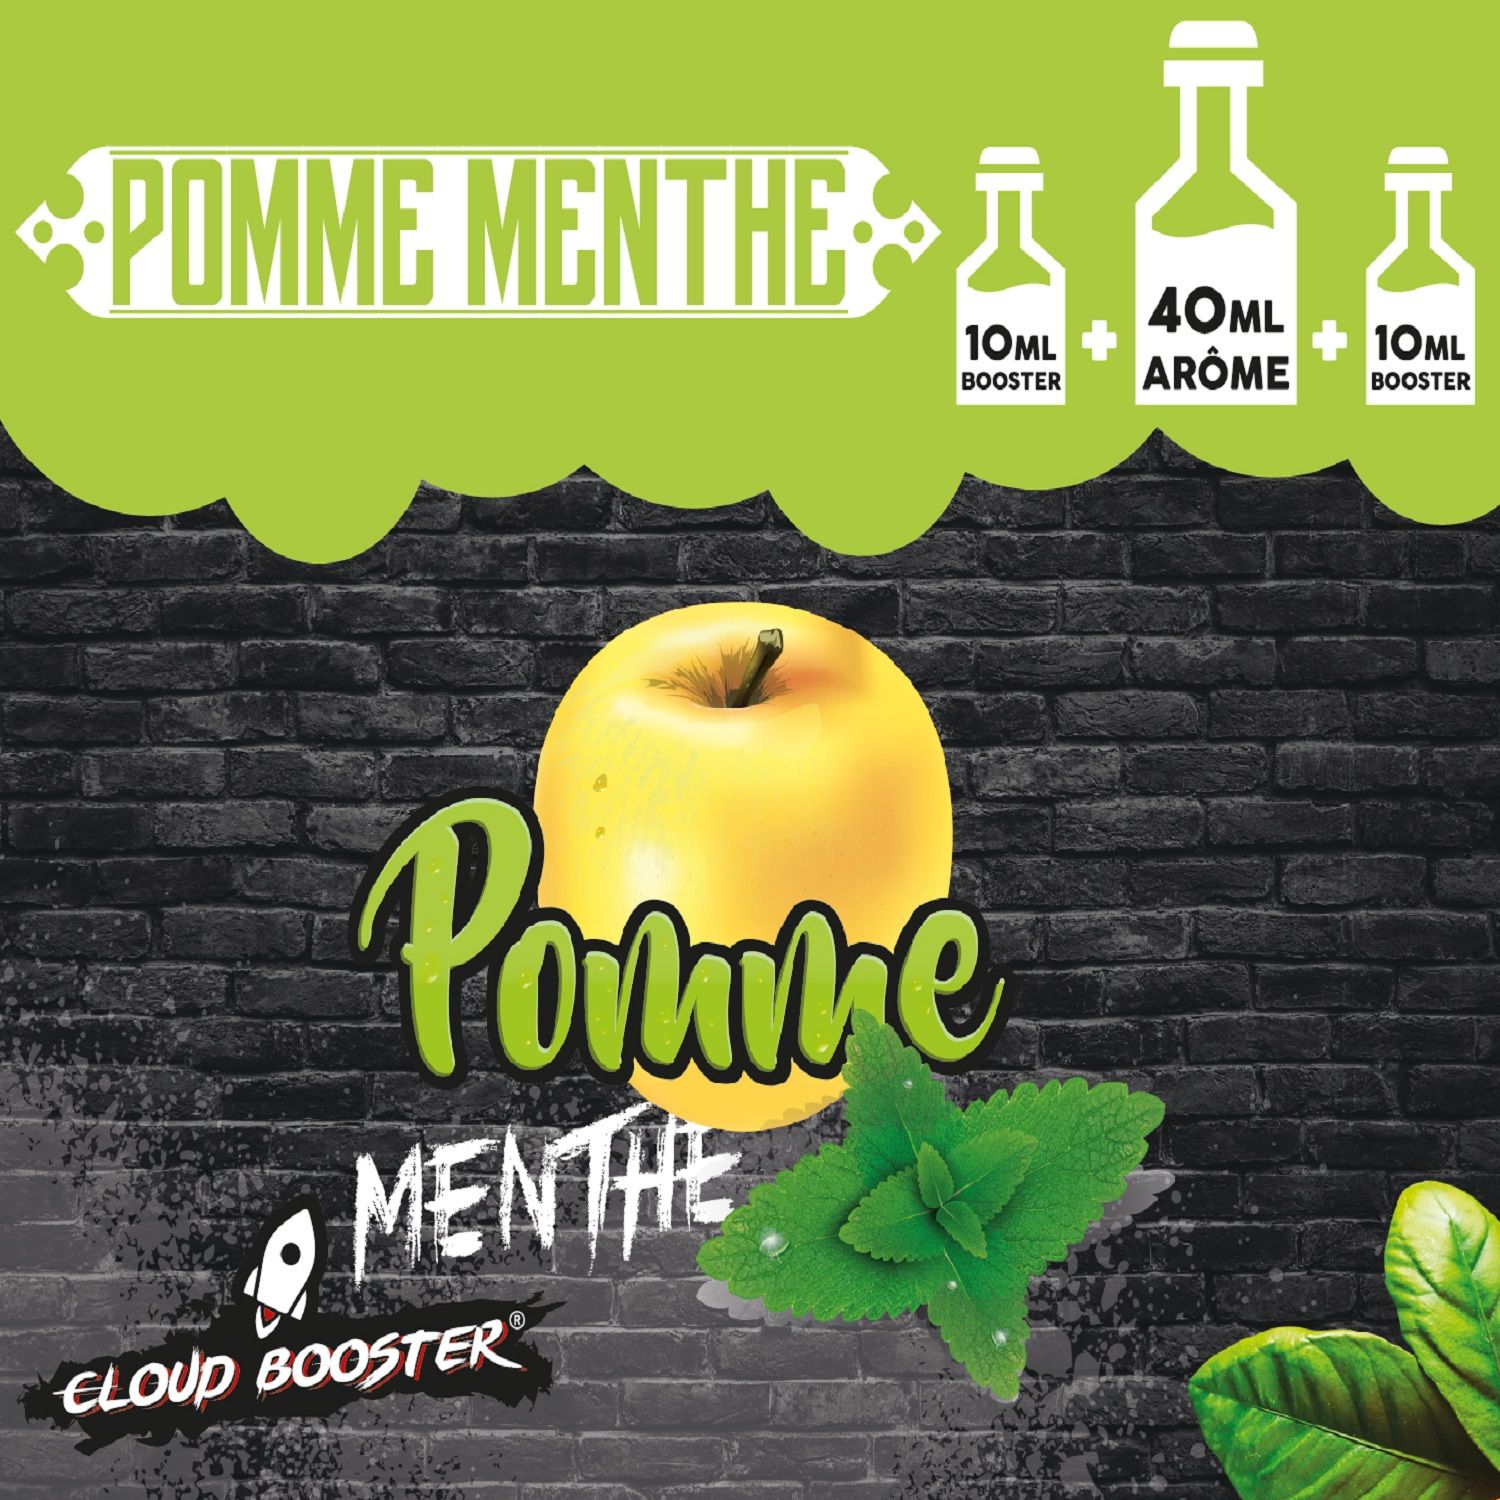 Pomme Menthe 40 ml - Cloud Booster